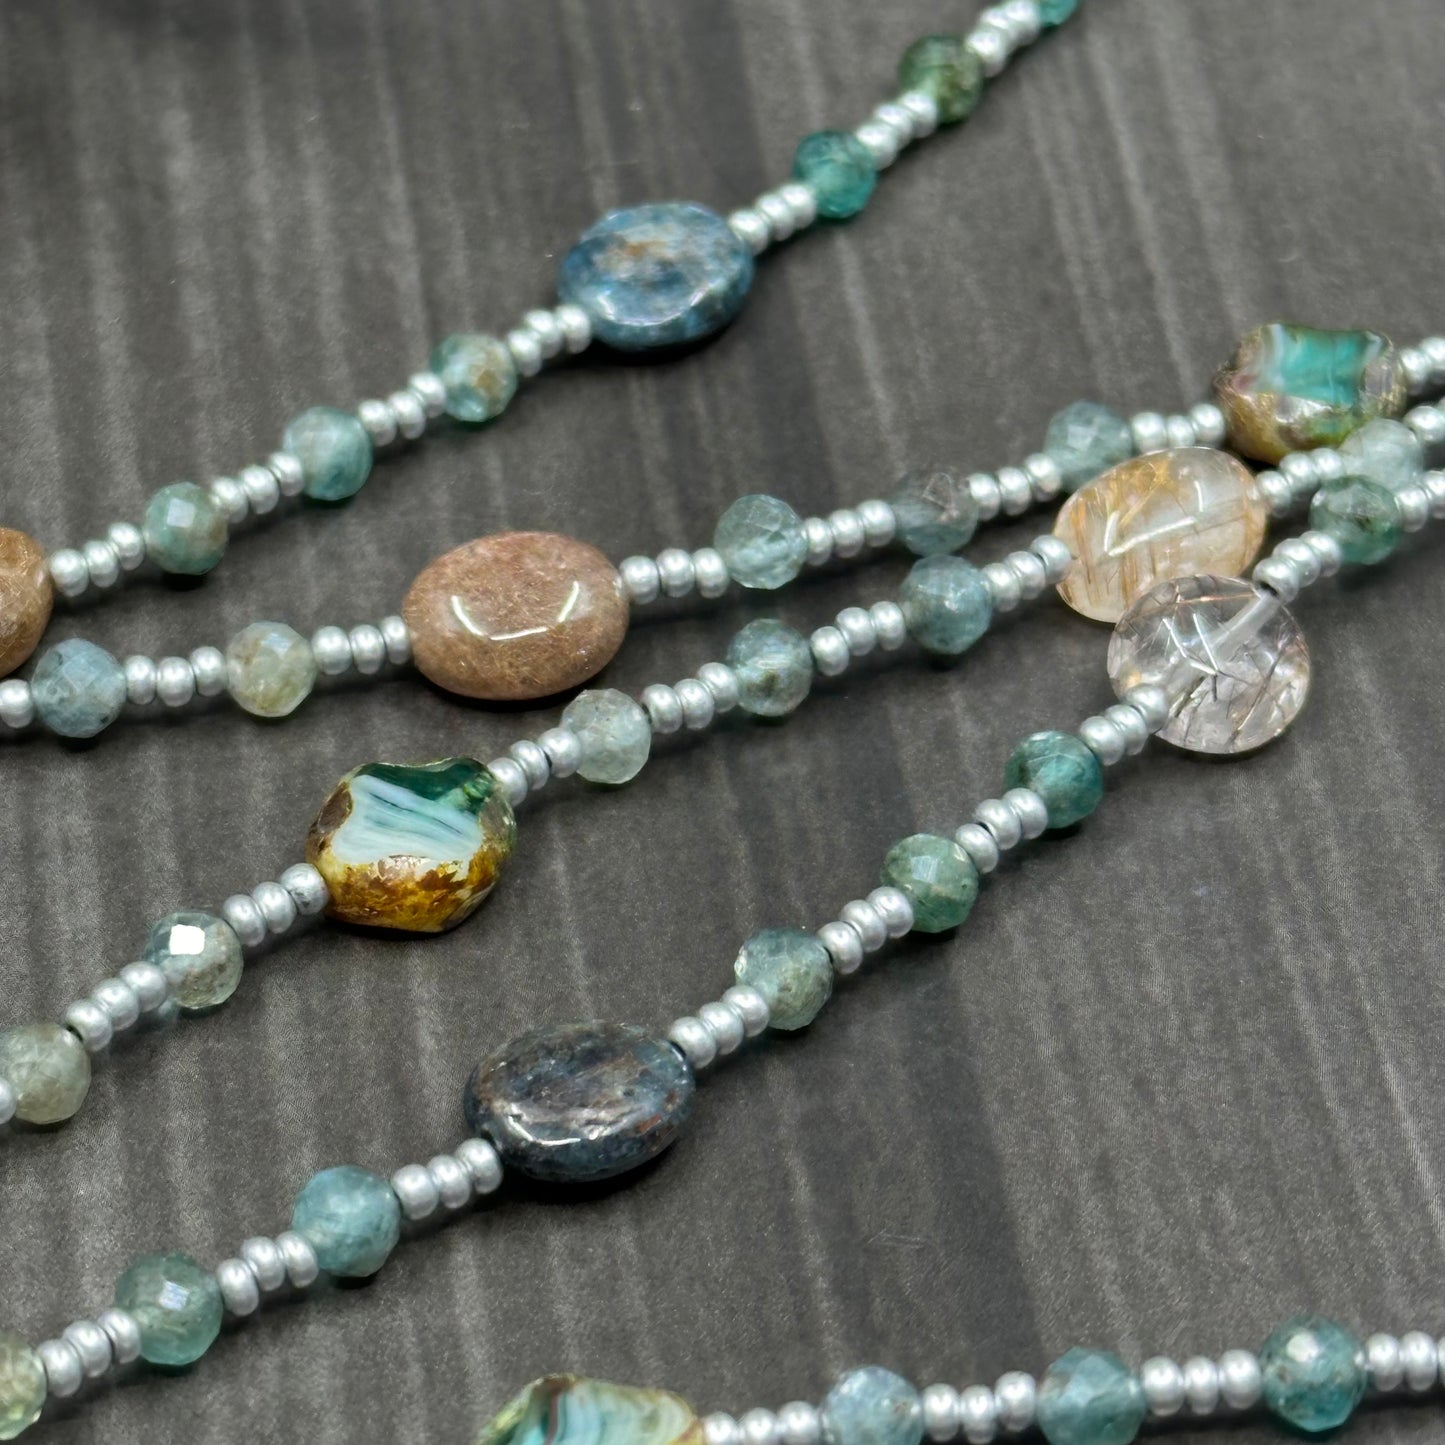 Long layering or wrapping piece with Kyanite, Apatite, Glass, and Rutilated Quartz